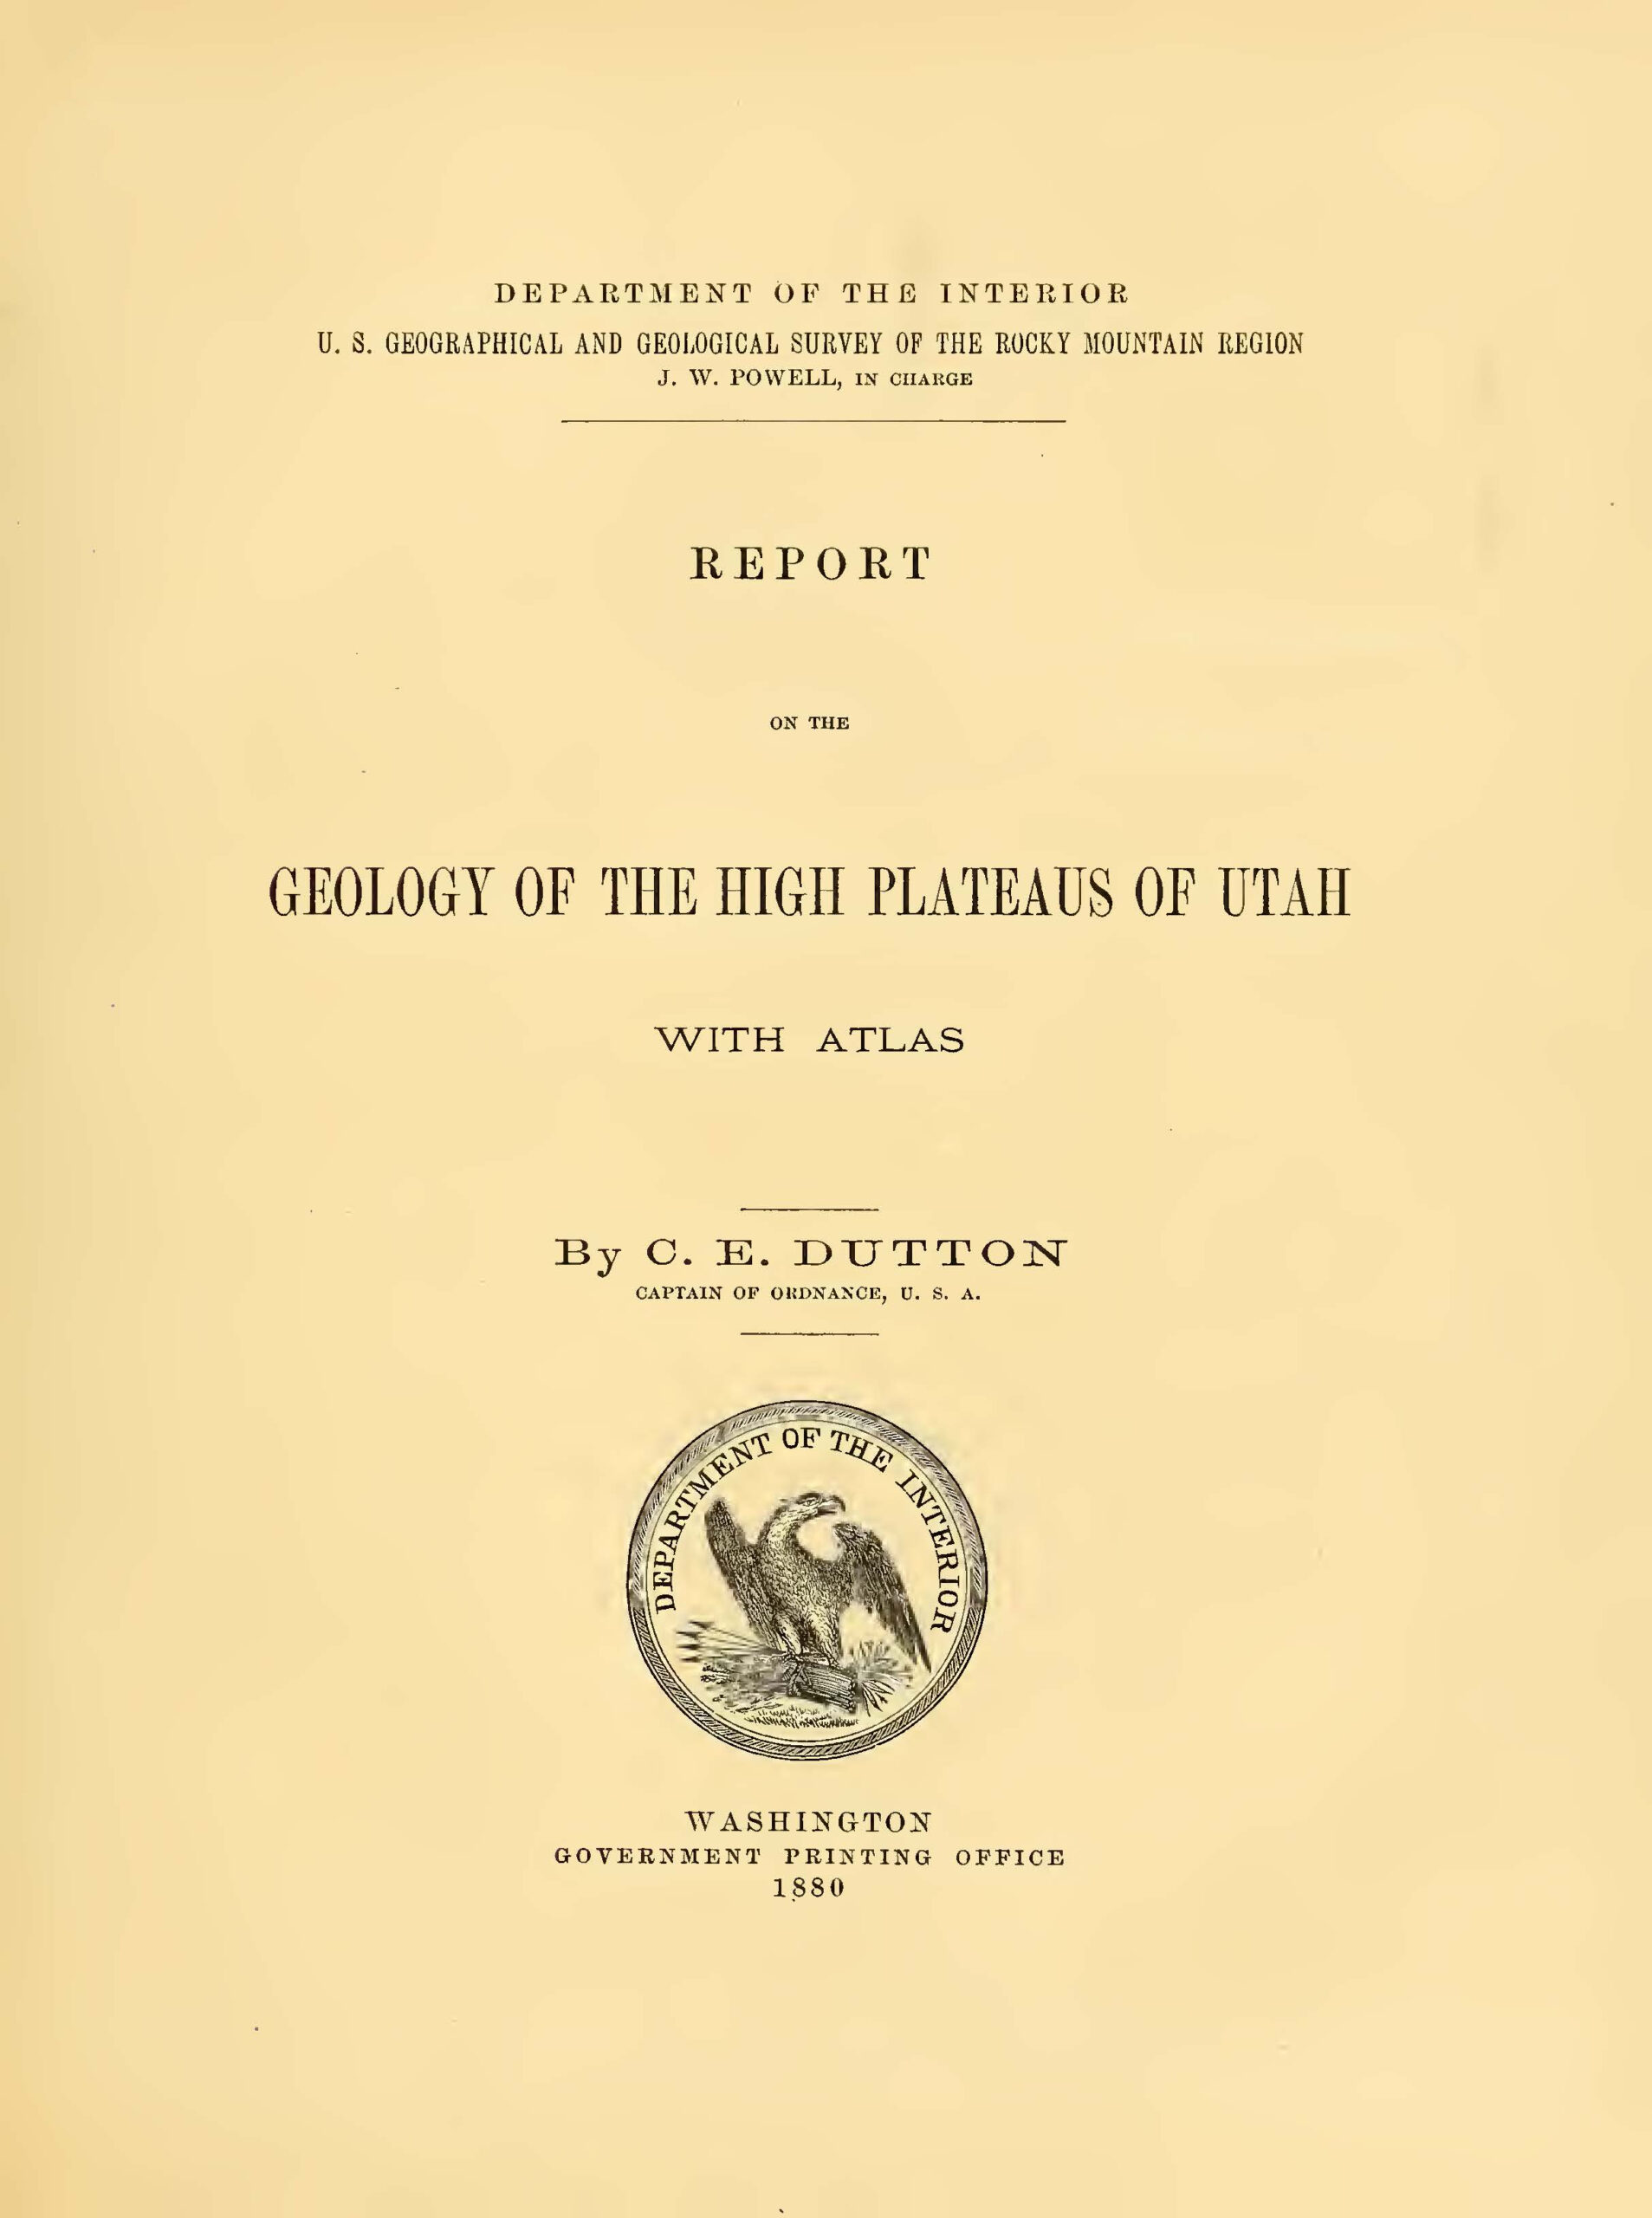 Report on the Geology of the High Plateaus of Utah